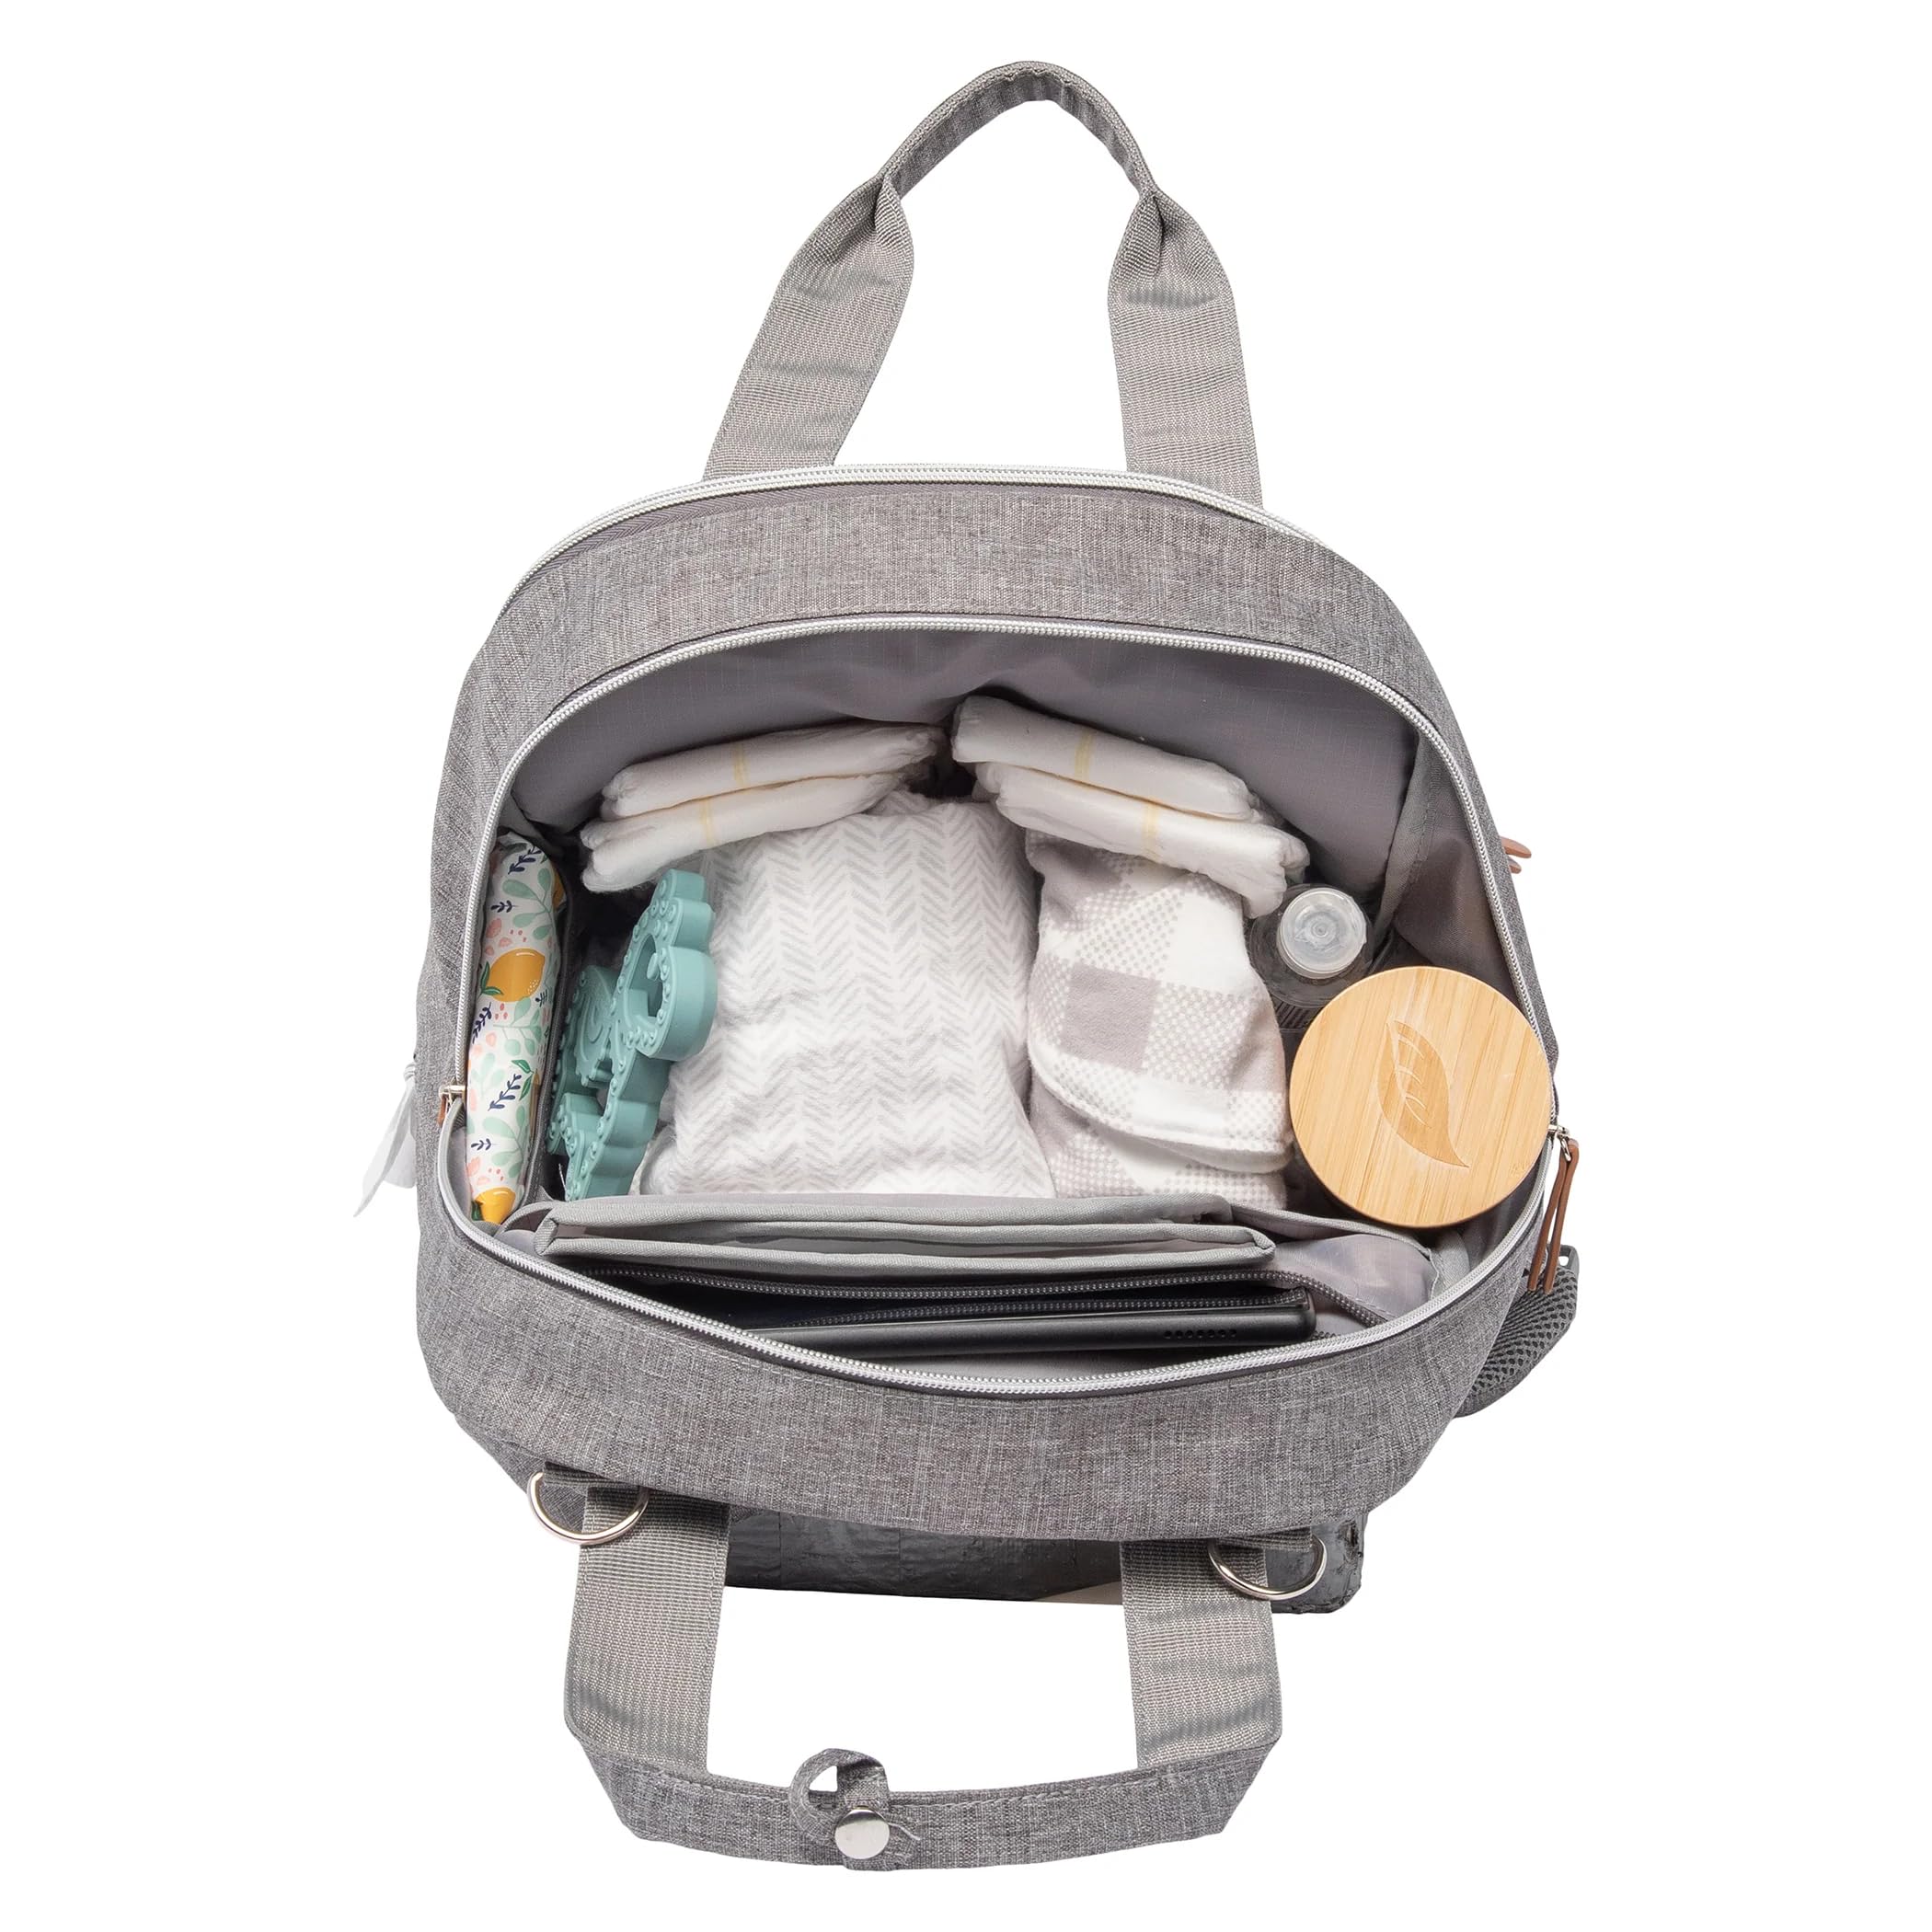 Trend Lab Diaper Bag Backpack Baby Bag Organizer with Removable Changing Station Pad, Includes Zipper Opening for Baby Wipes and Insulated Pockets for Bottles